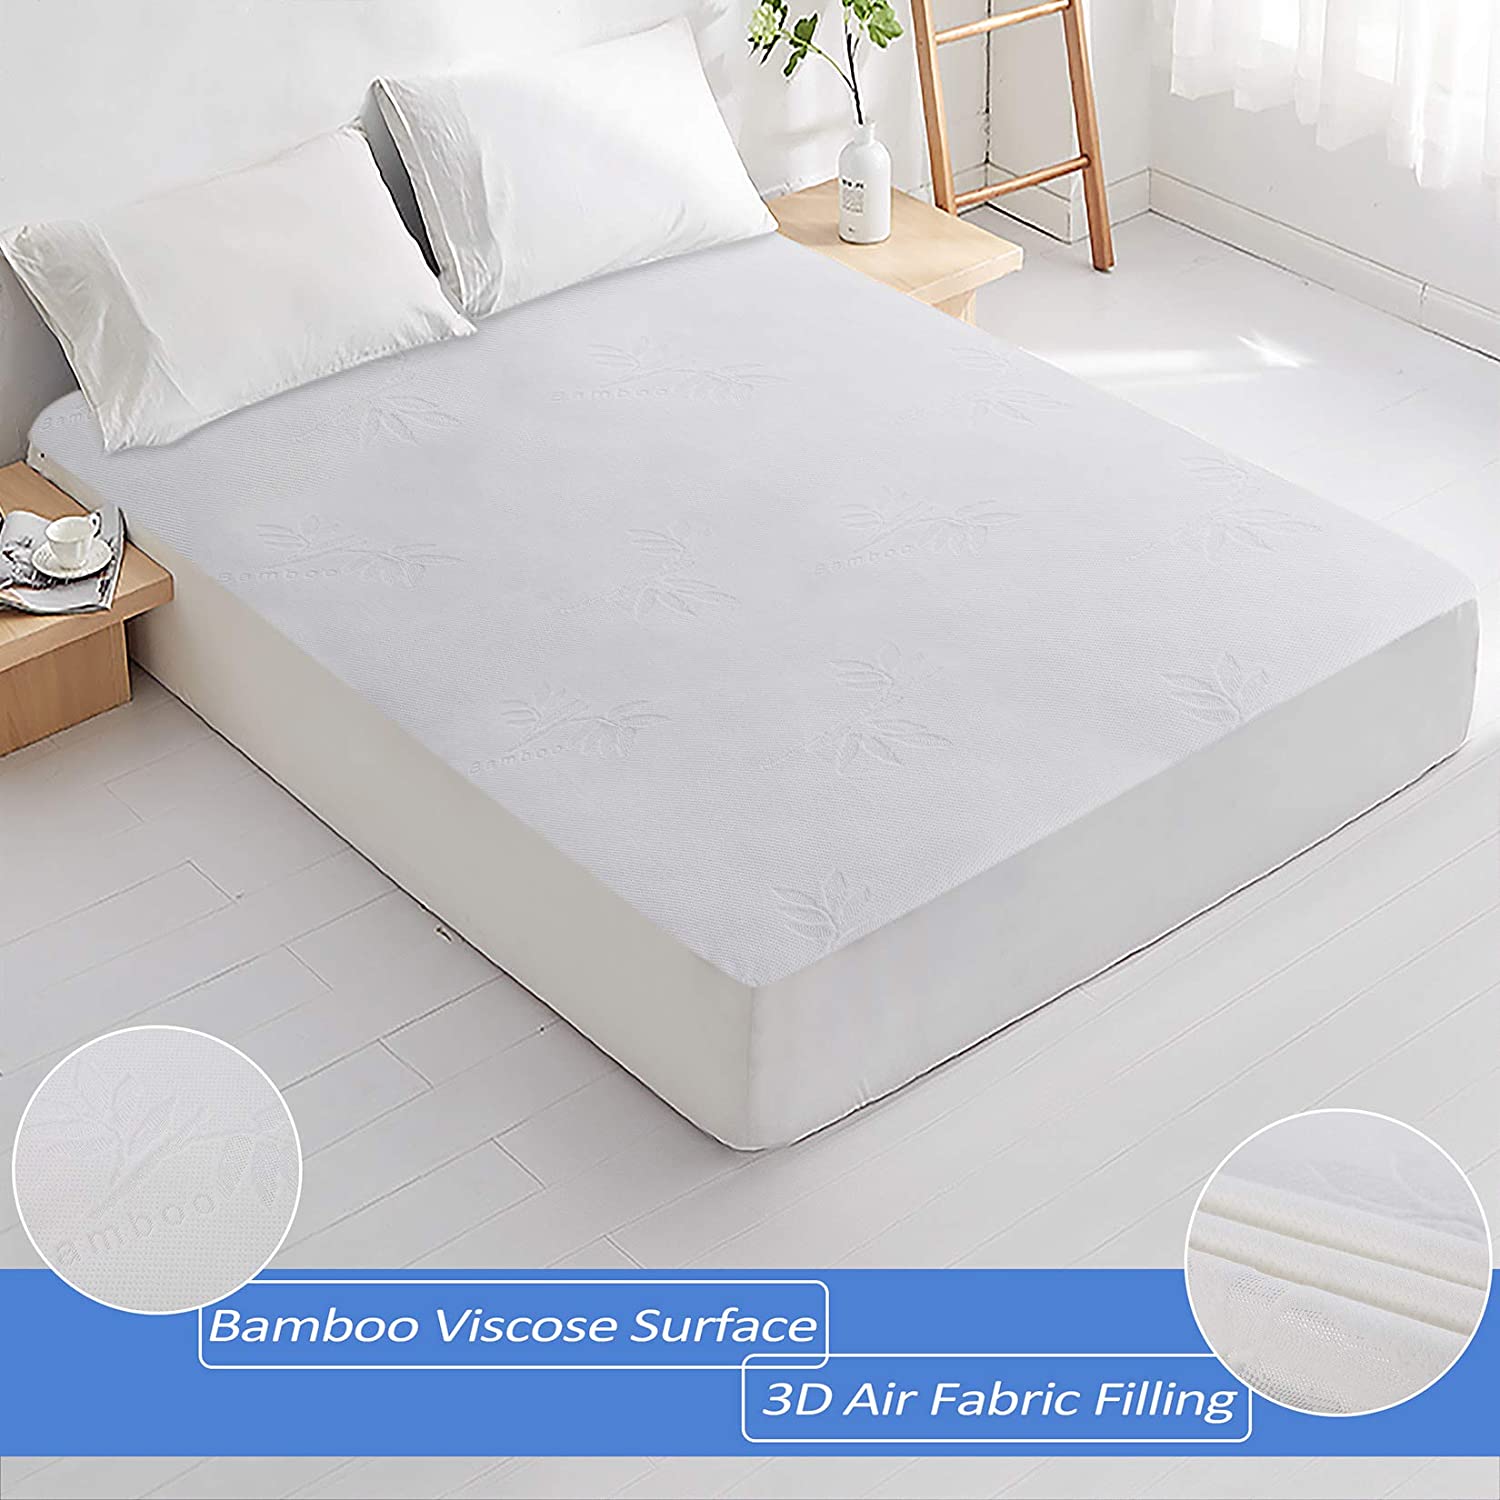 CAROMIO Twin Mattress Protector Waterproof, Bed Bug Mattress Cover Fitted Deep Pocket, Premium Bamboo 3D Air Fabric Bed Pad Protection, Breathable, Vinyl Free, Noiseless(Twin, 39x75)